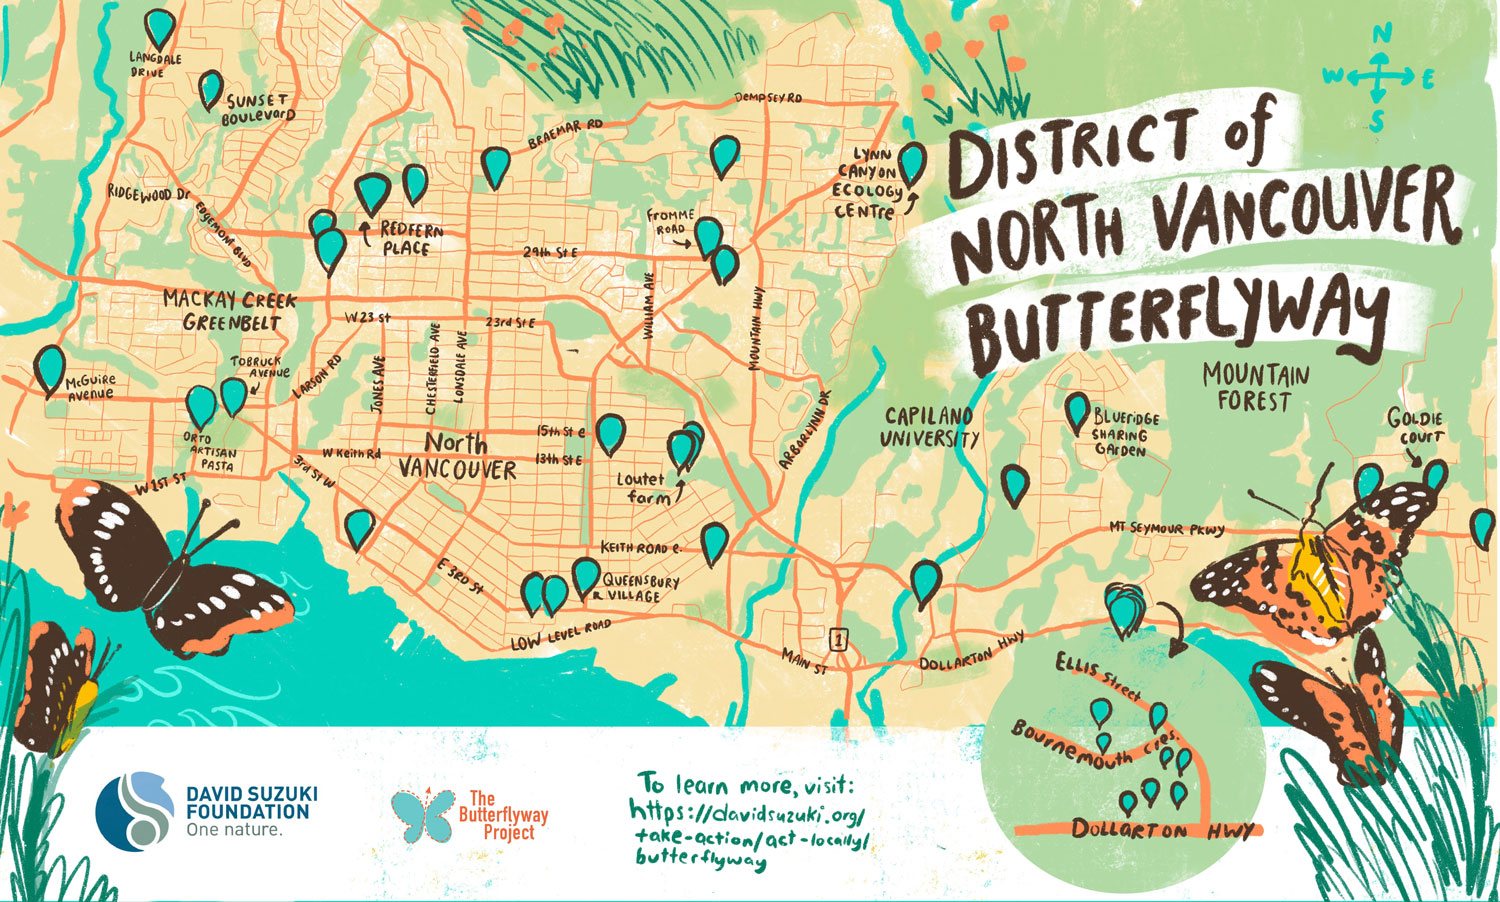 Illustrated map of butterflyway locations in the District of North Vancouver